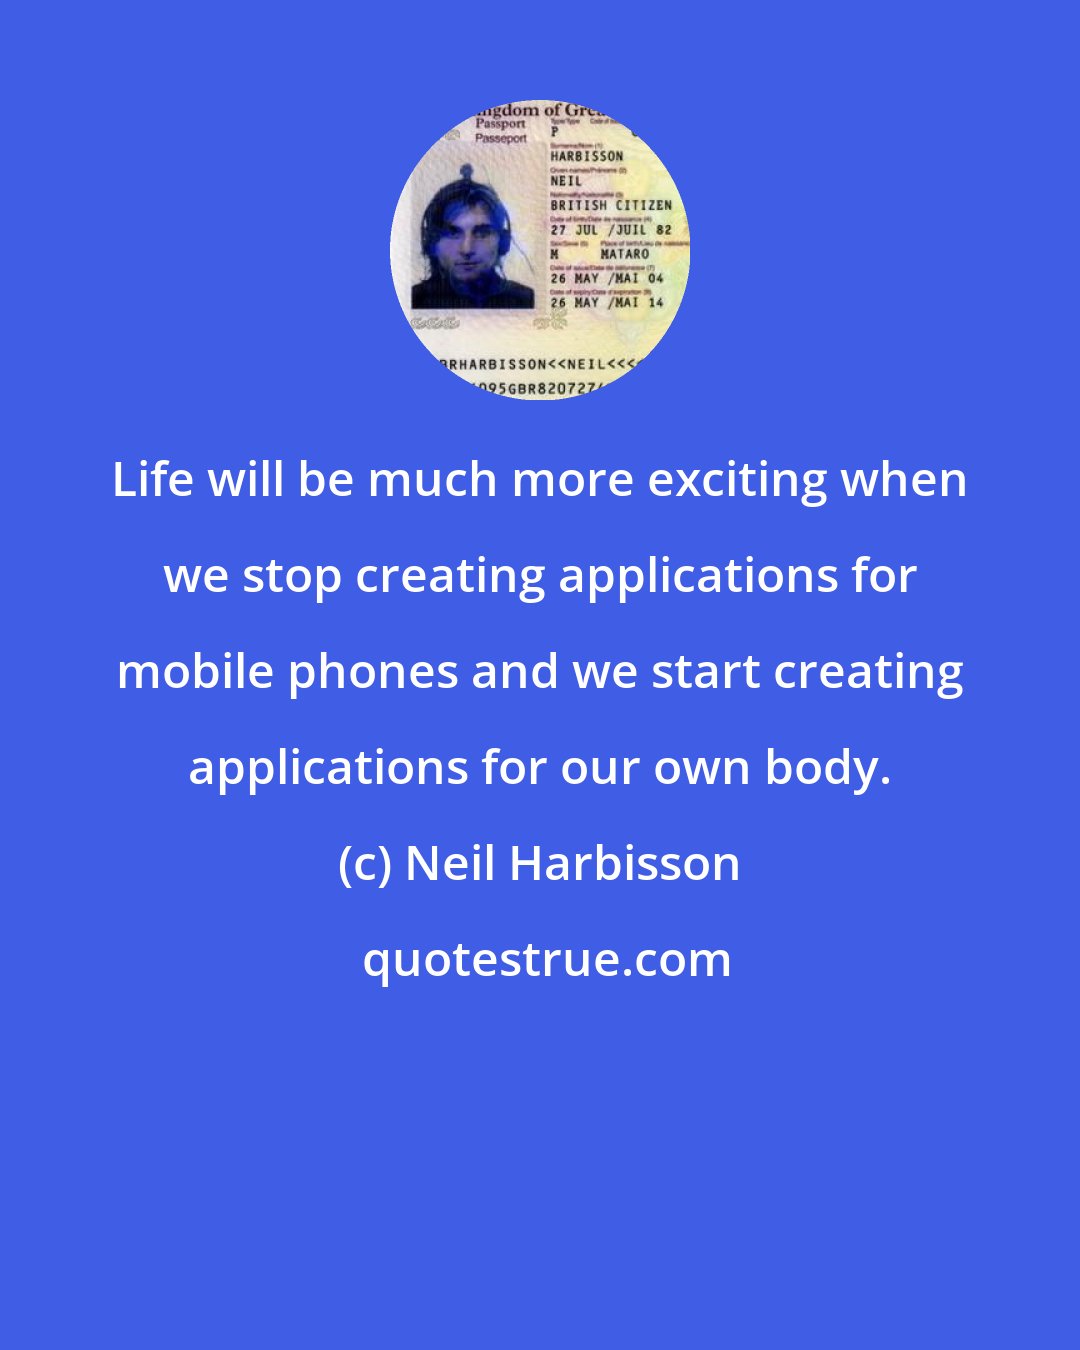 Neil Harbisson: Life will be much more exciting when we stop creating applications for mobile phones and we start creating applications for our own body.